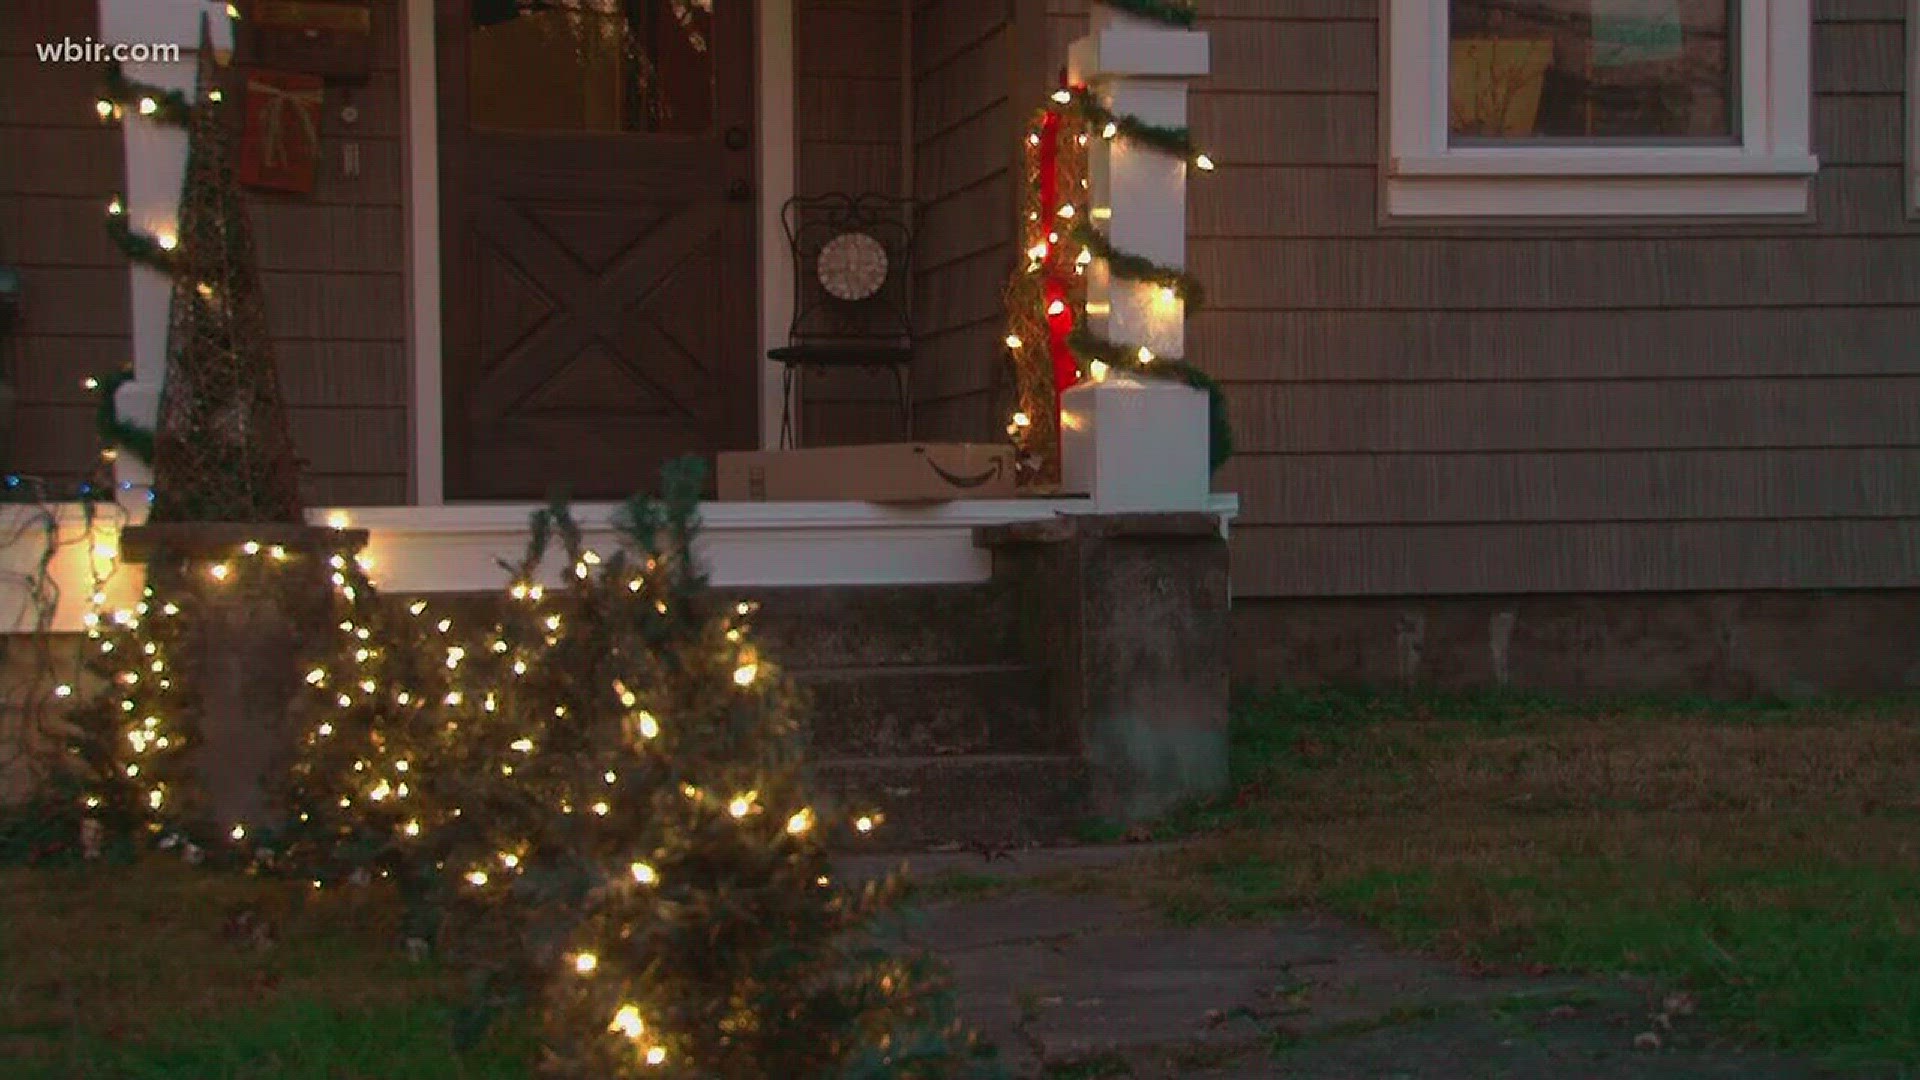 Dec. 4, 2017: Big name companies are providing extra security measures to keep you package deliveries safe during the holiday season, but one Knoxville man is also taking matters into his own hands.